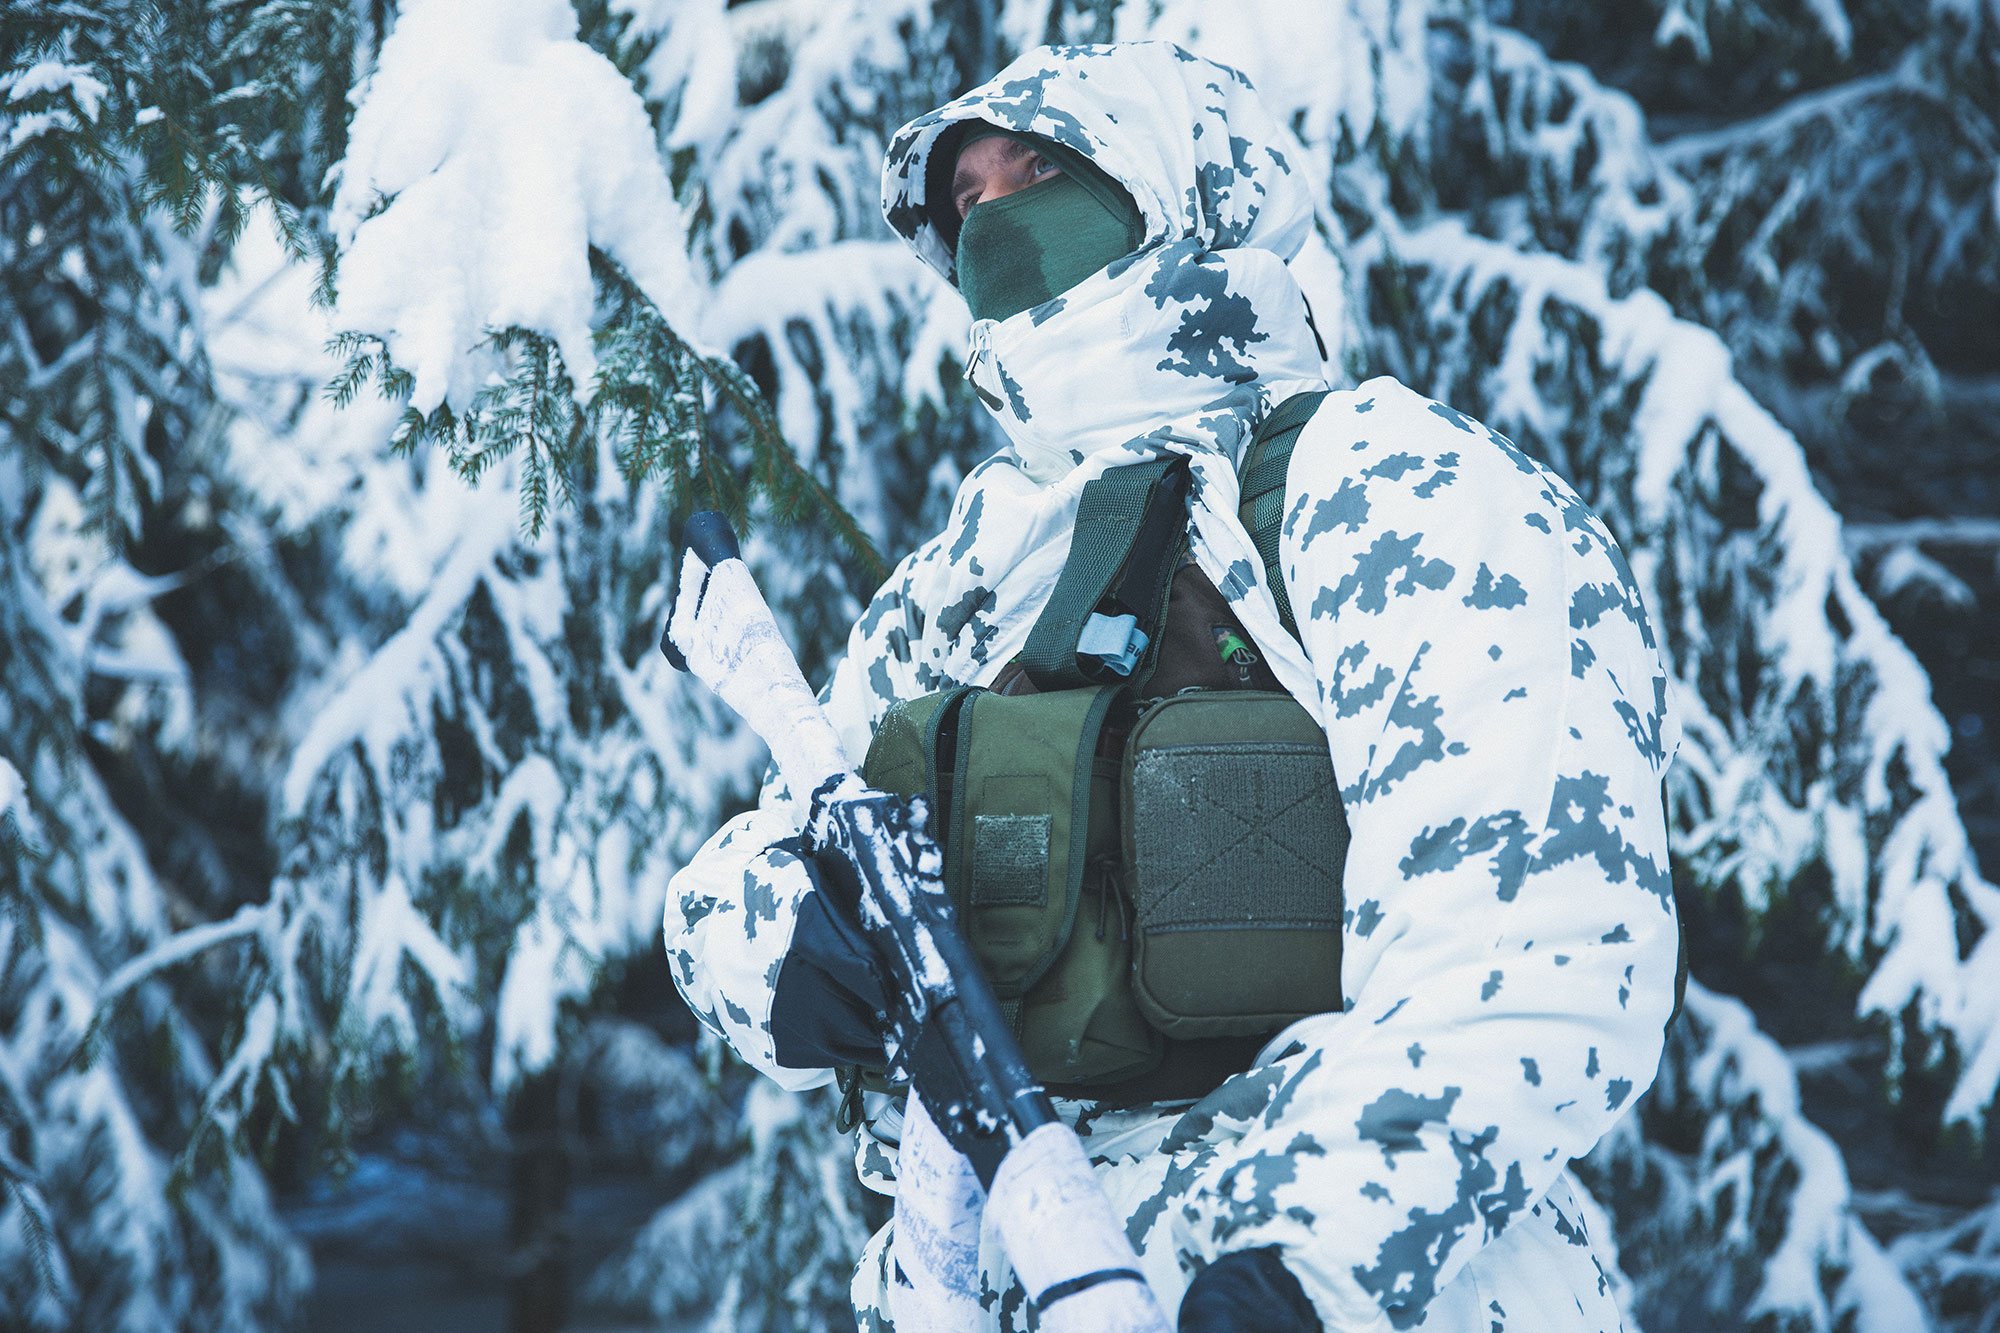 L7 snow camo soldier in spruce forest